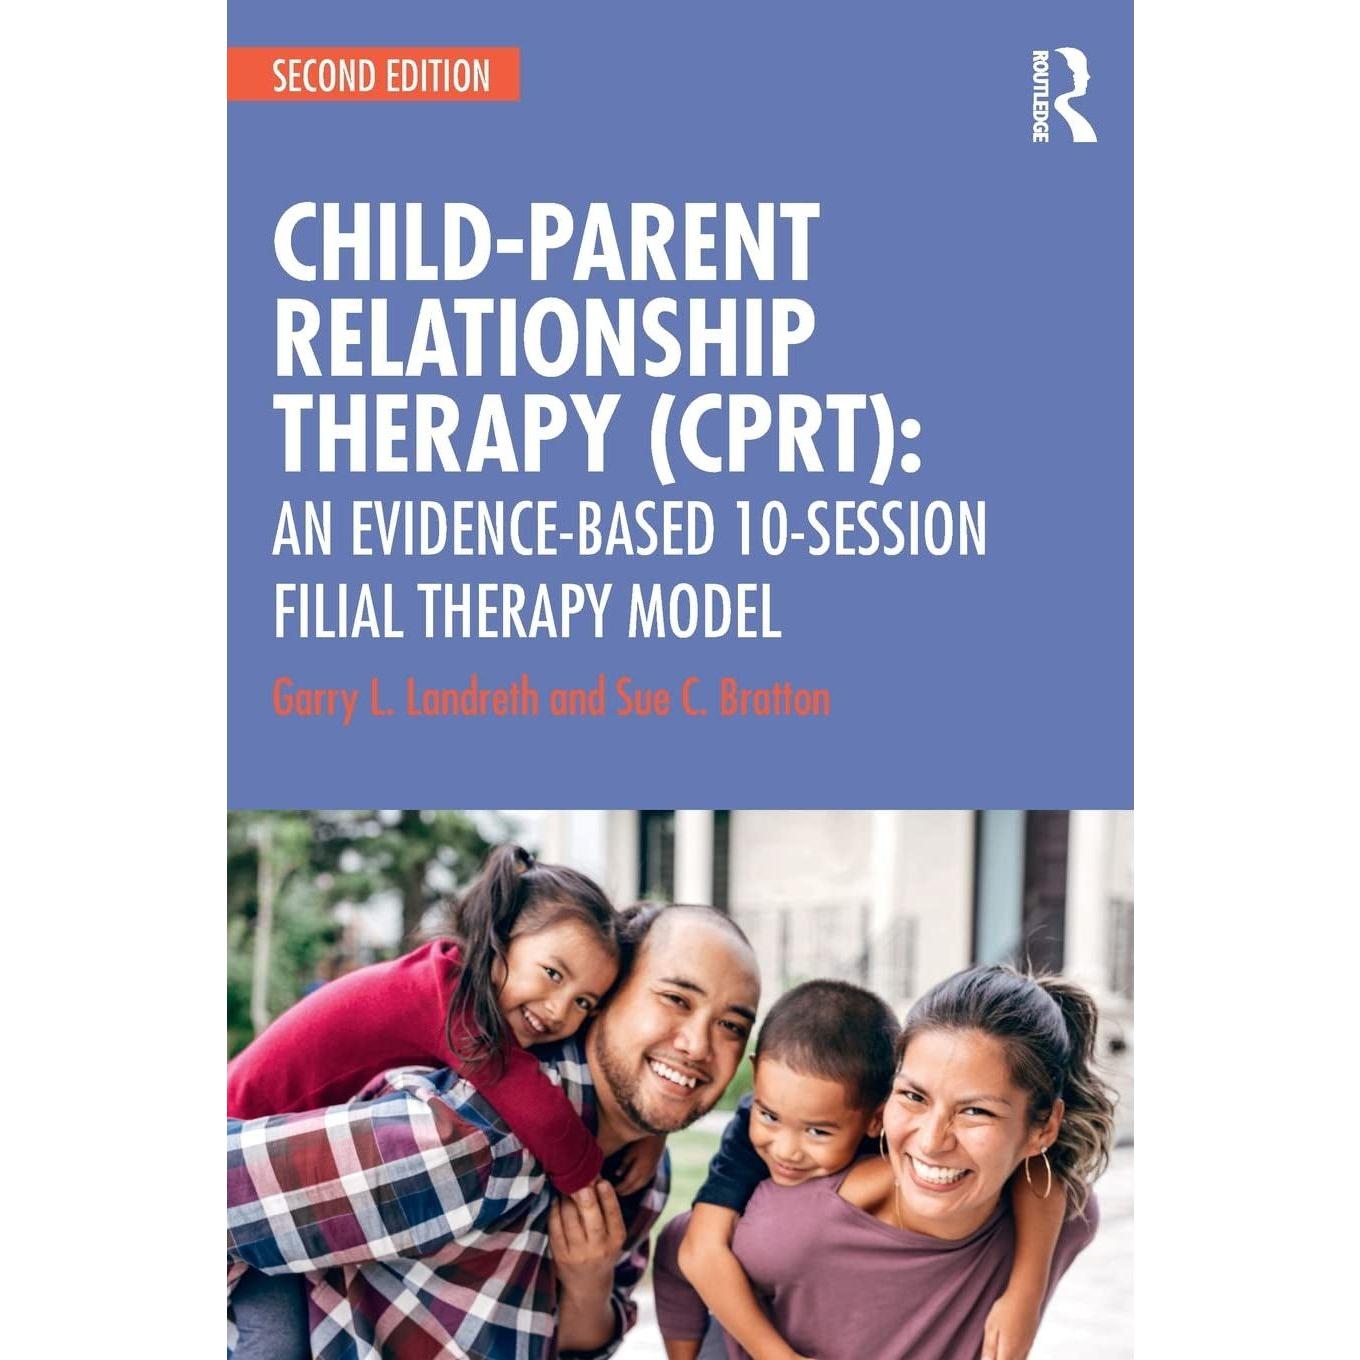 Child-Parent Relationship Therapy (CPRT): an Evidence-Based 10-Session Filial Therapy Model